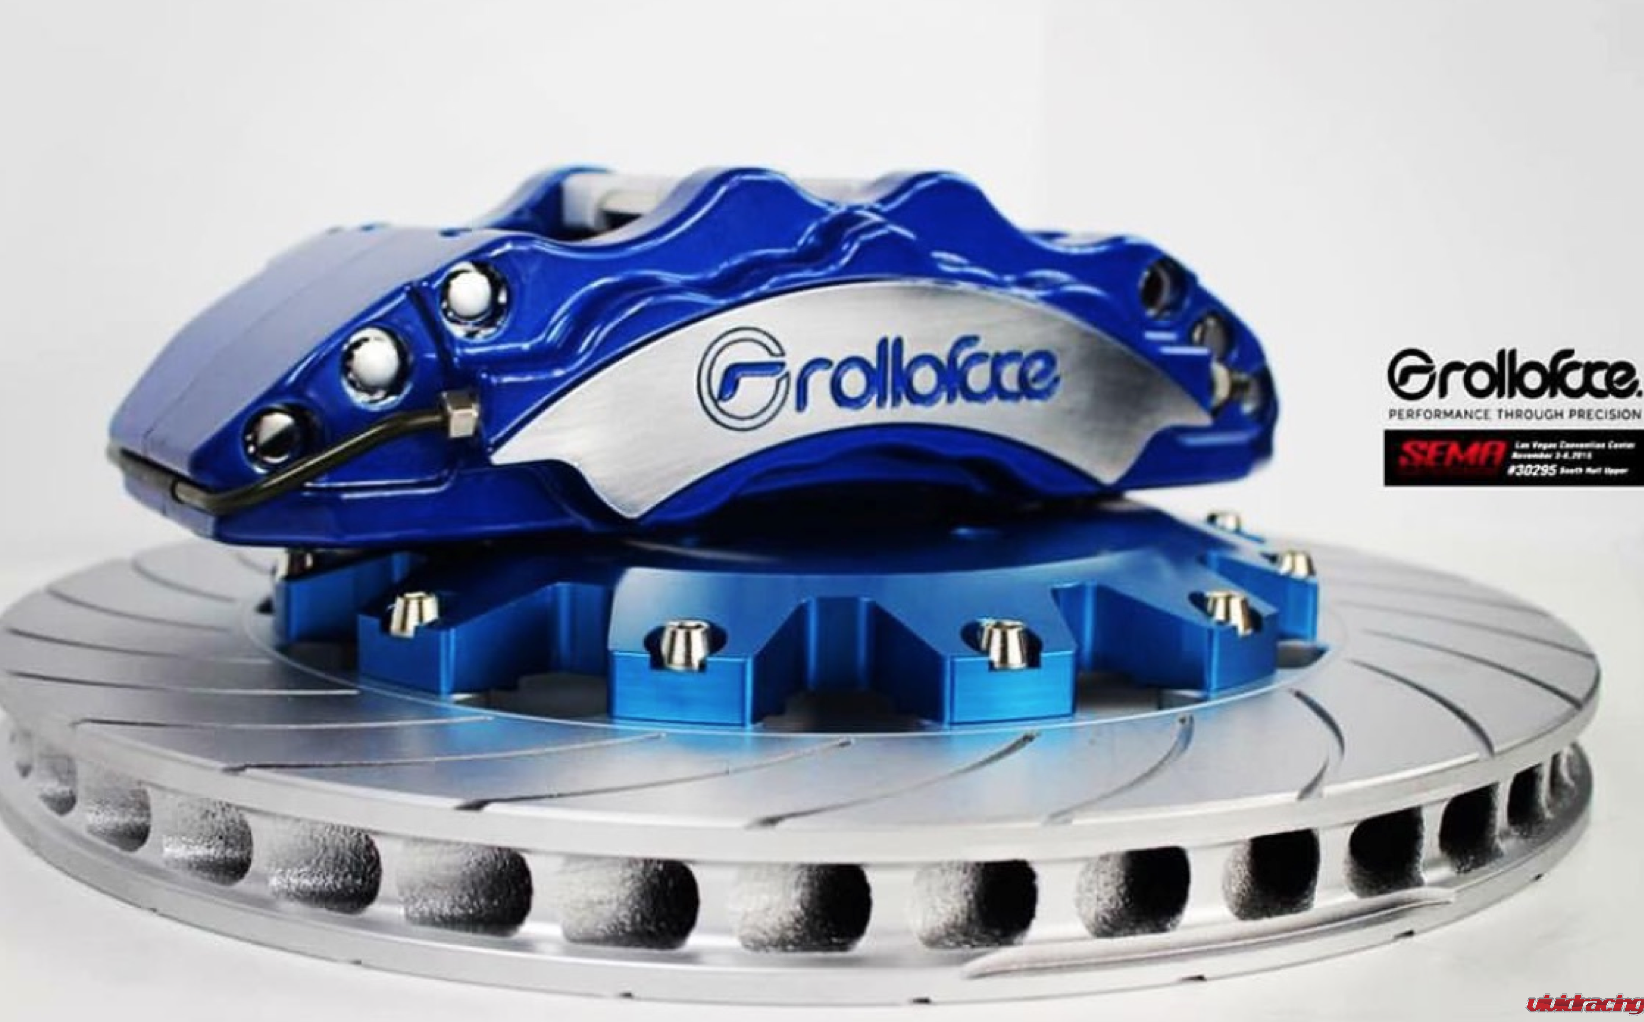 Rolloface, brakes, calipers, BBK, powder coating, SS series, candy paint